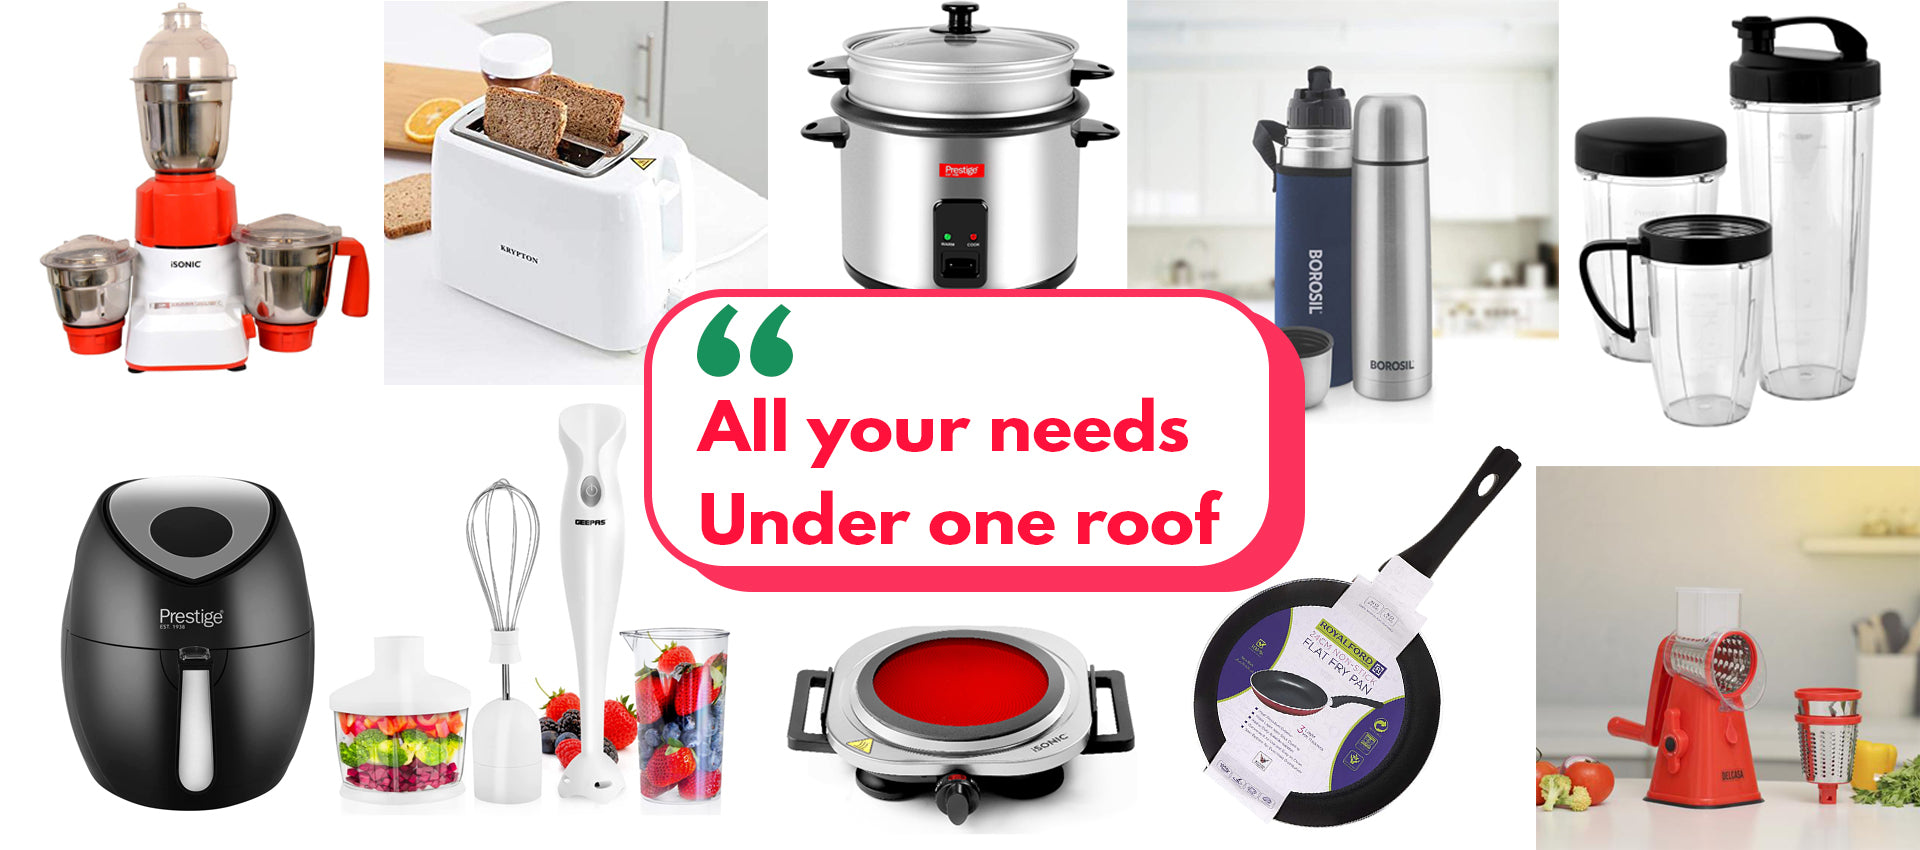 Transform your home with our versatile range of household essentials for a clean and organized space